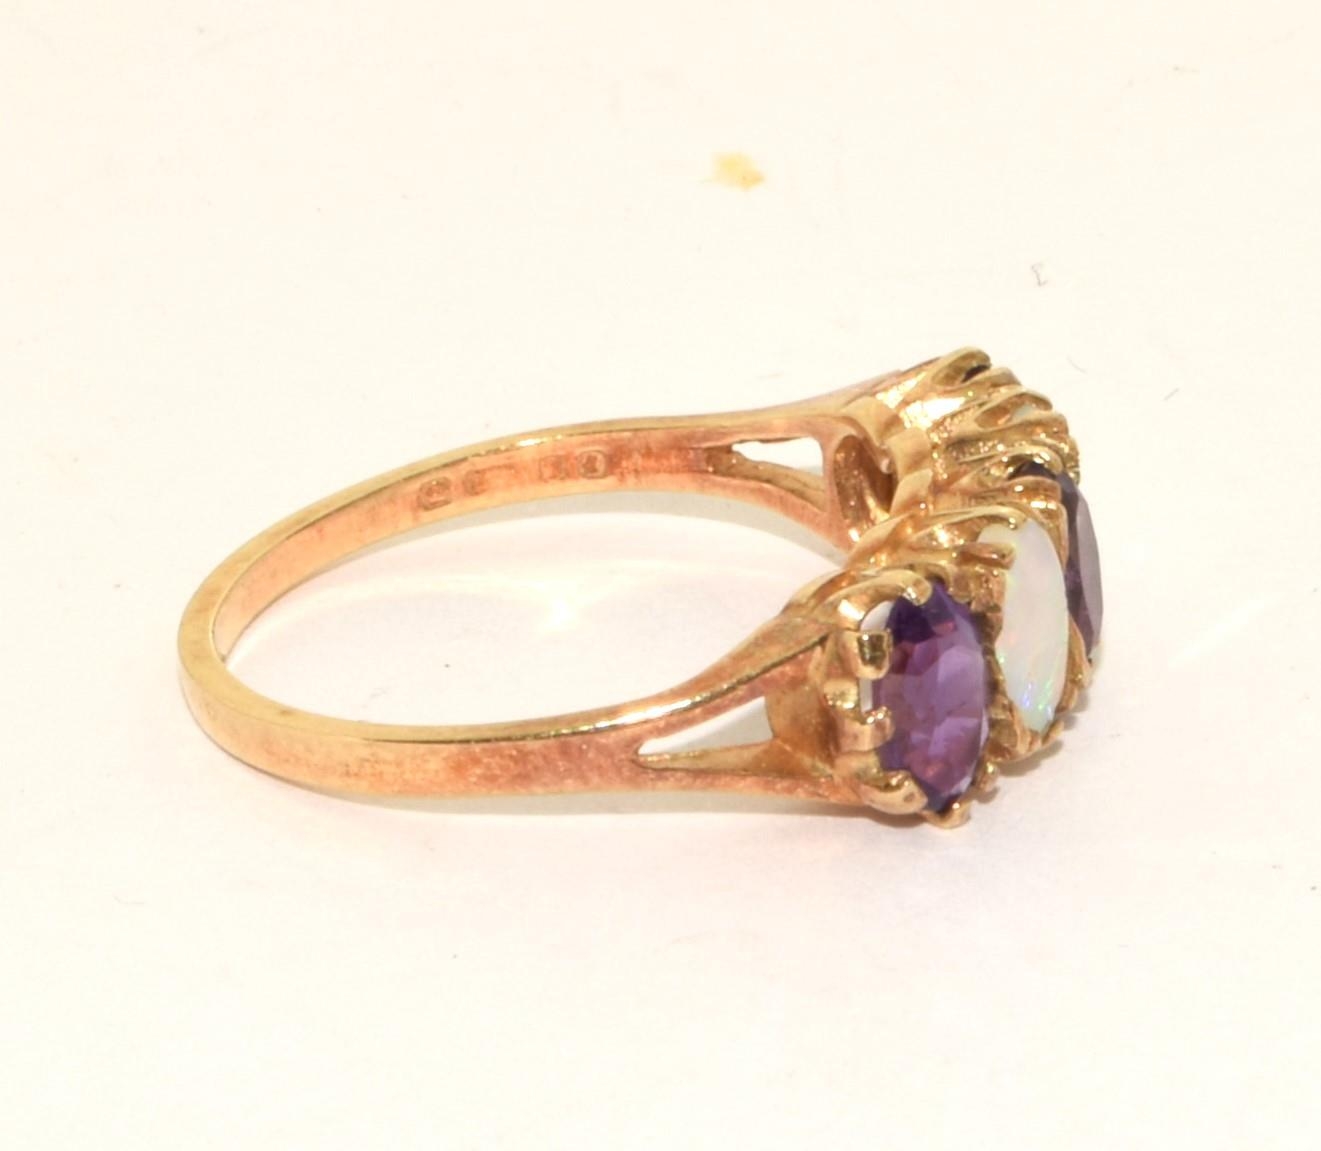 9ct gold Antique set Opal and Amethyst 5 stone ring size O - Image 4 of 5